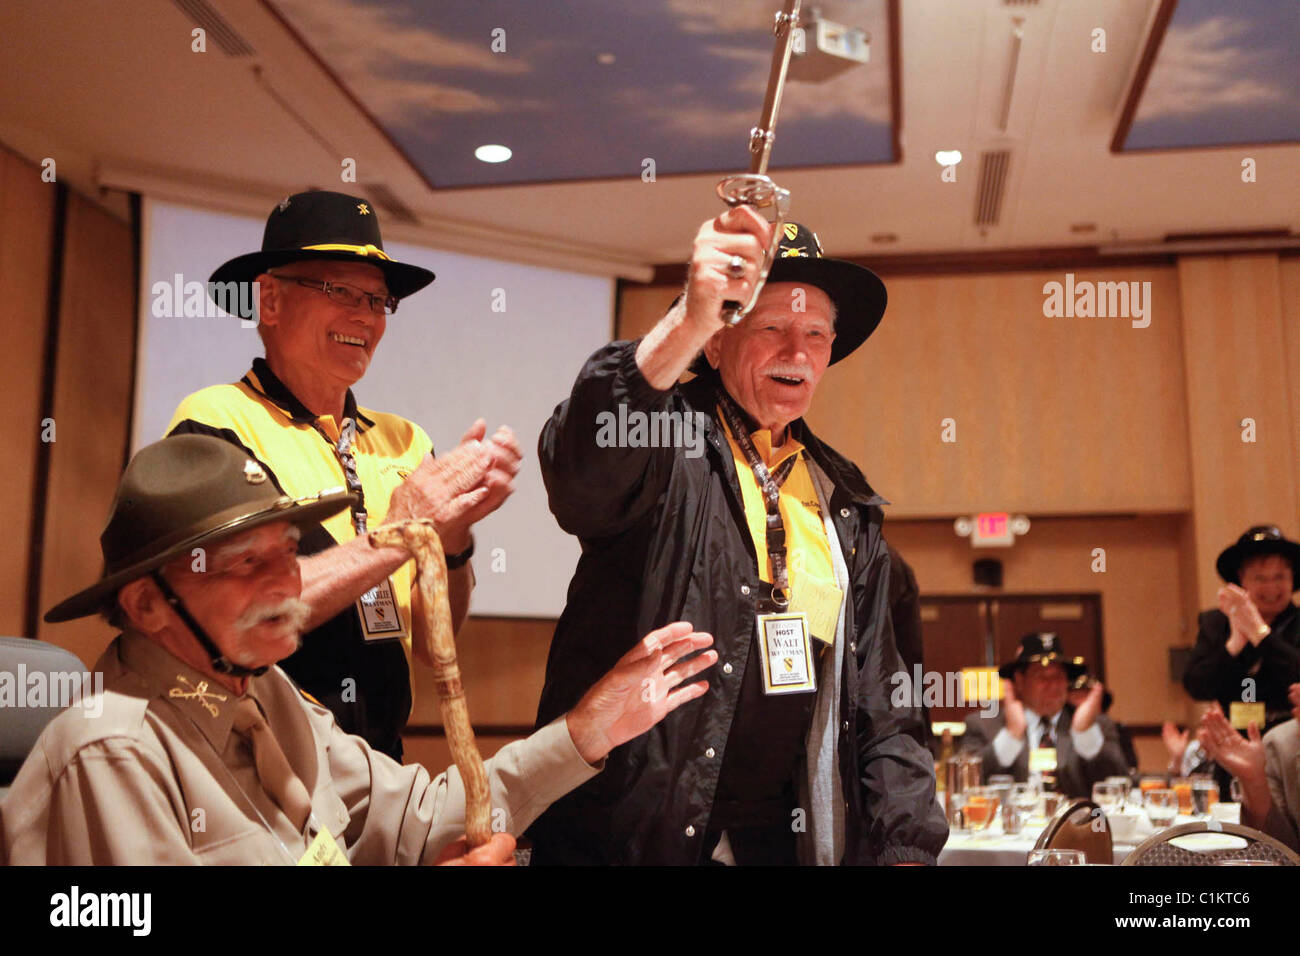 Walter Westman, who is 100-years old, picks up a Cavalry Saber while celebrating his birthday First Cavalry Division reunion. Stock Photo